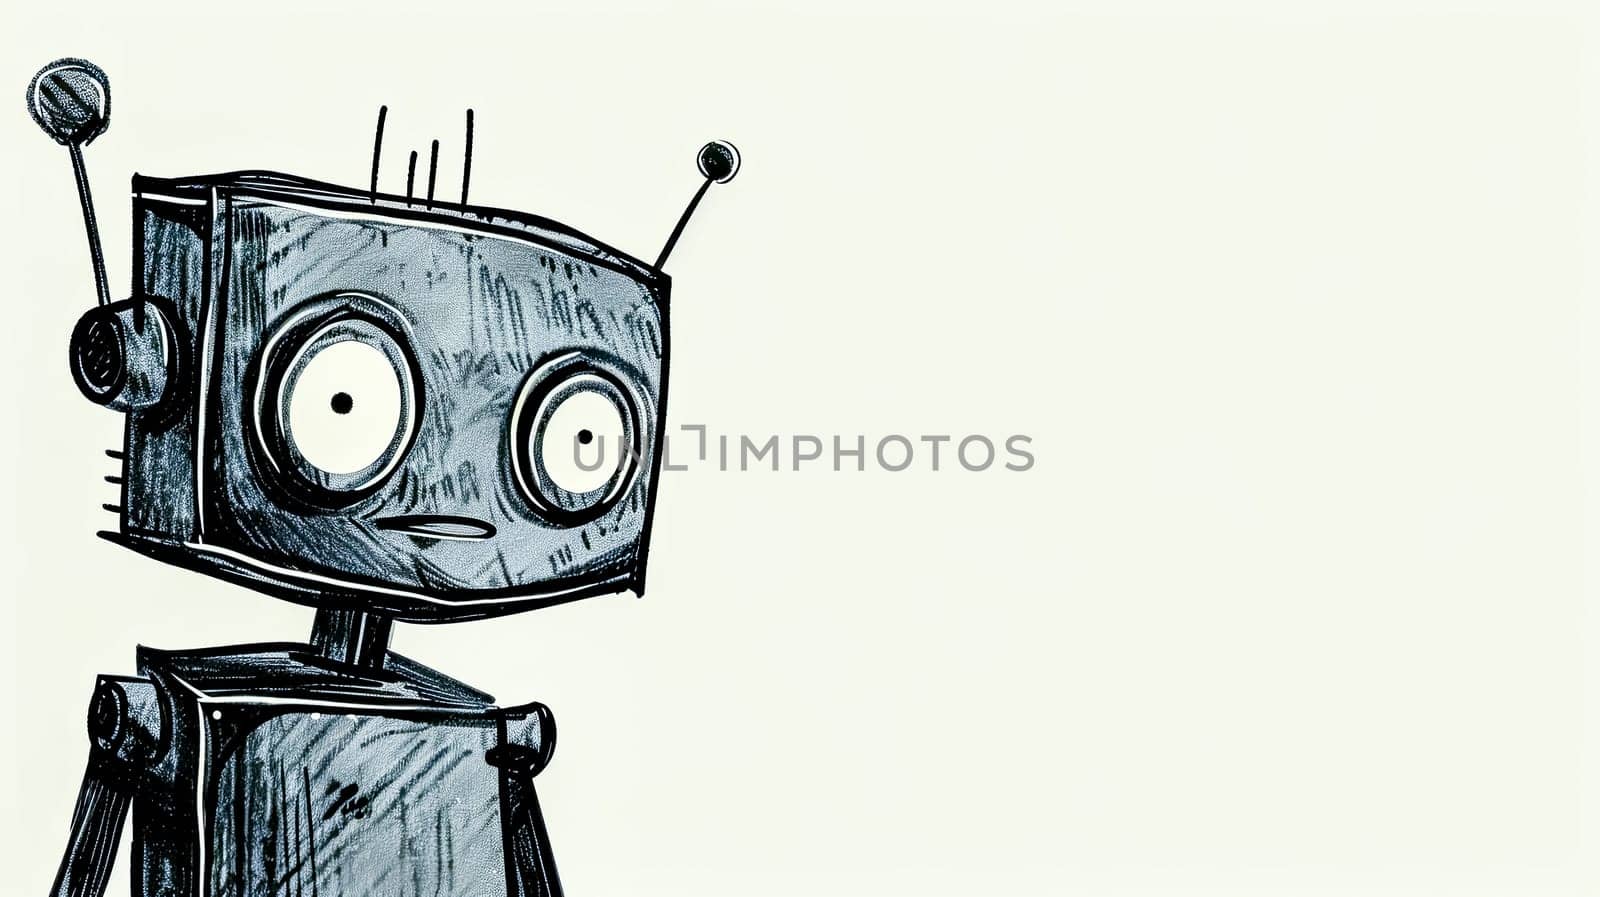 quirky robot with large, expressive eyes and whimsical antennas, rendered in a monochrome, sketch-like style against a plain background, exuding a charming blend of retro and futuristic vibes by Edophoto